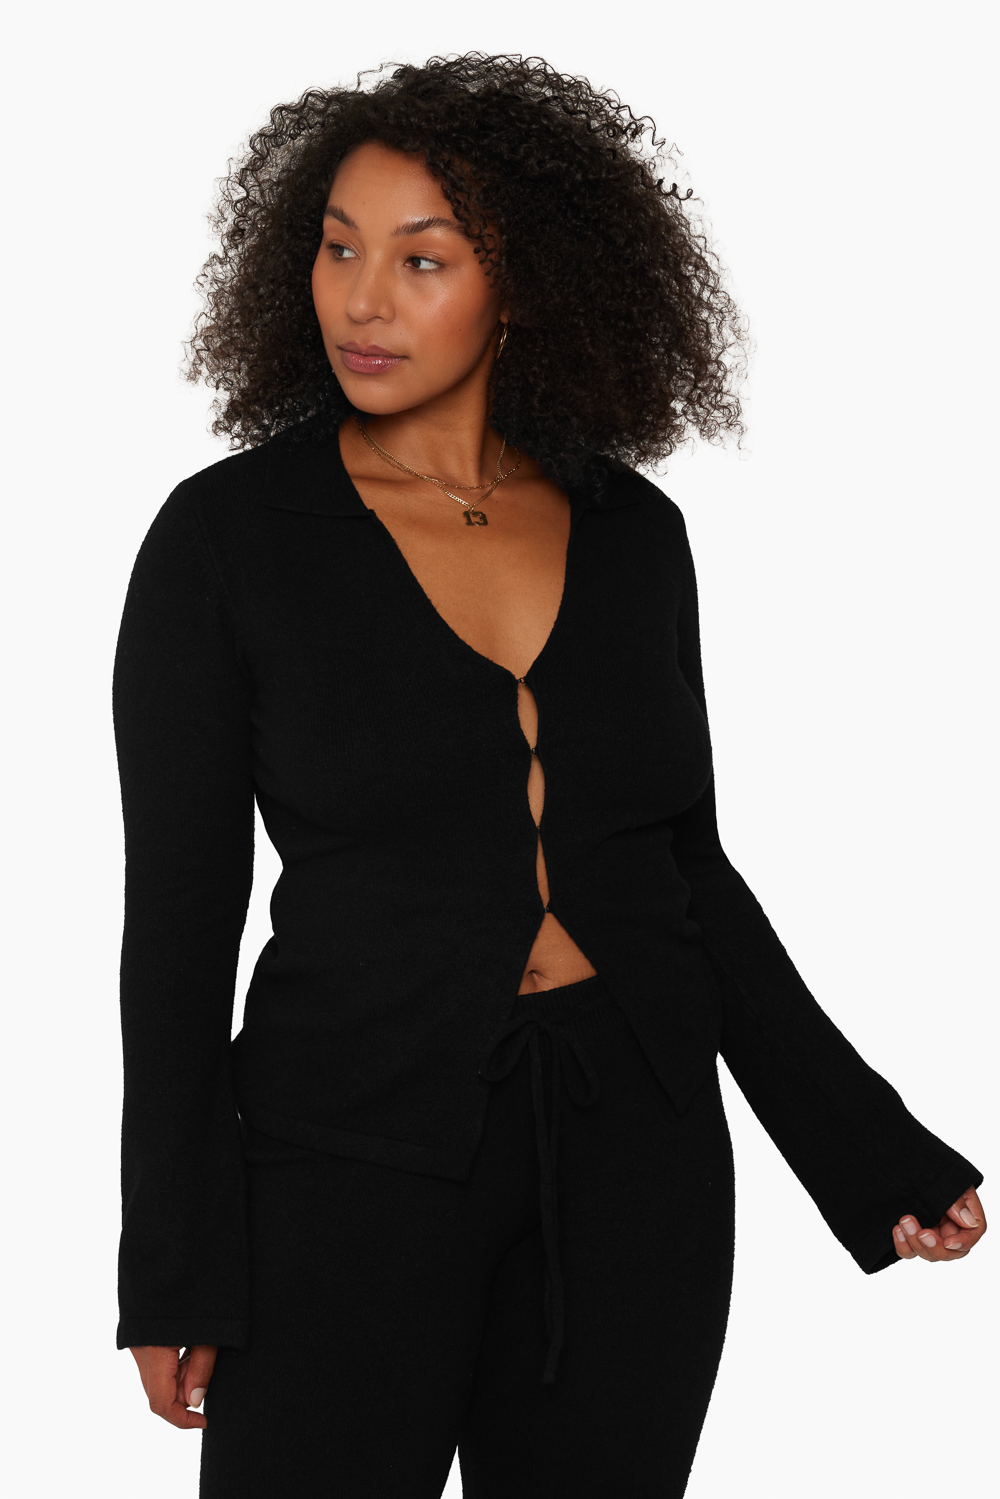 JERSEY KNIT DOUBLE V CARDIGAN - ONYX Featured Image